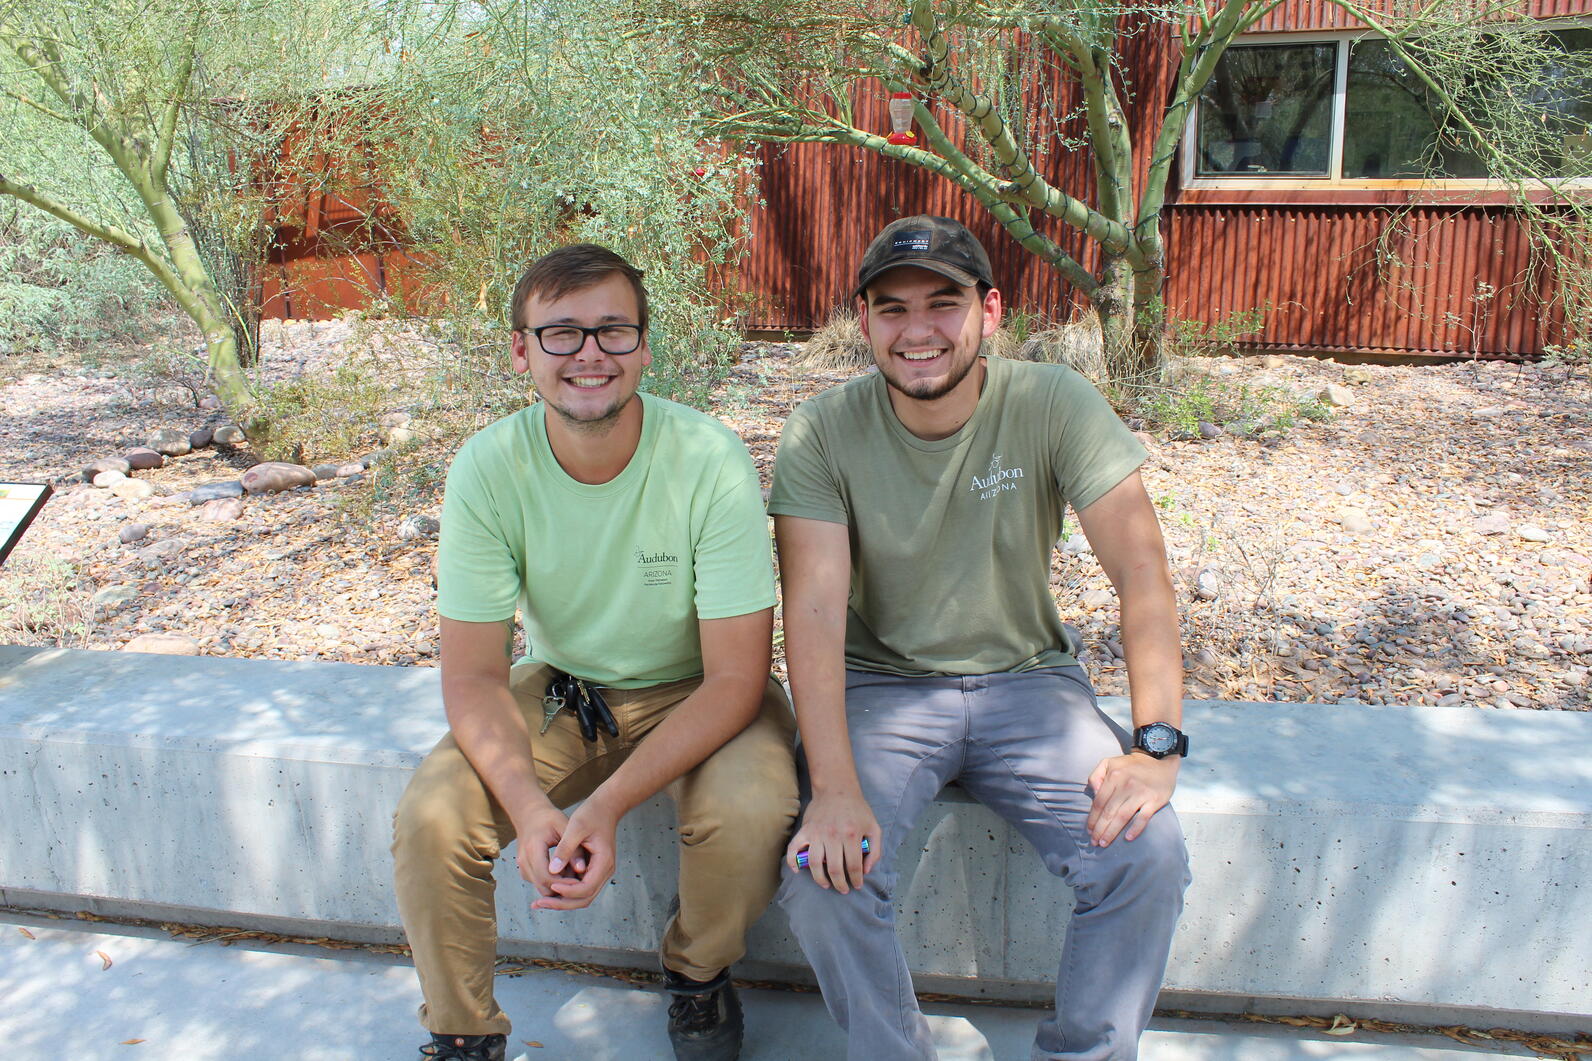 Dan Hite and River Pathways intern turned Mackenzie Fellow, Michael Montano, will both be leading River Pathways trips this Fall.  From the students they work with, we'll recruit next year's field crew.